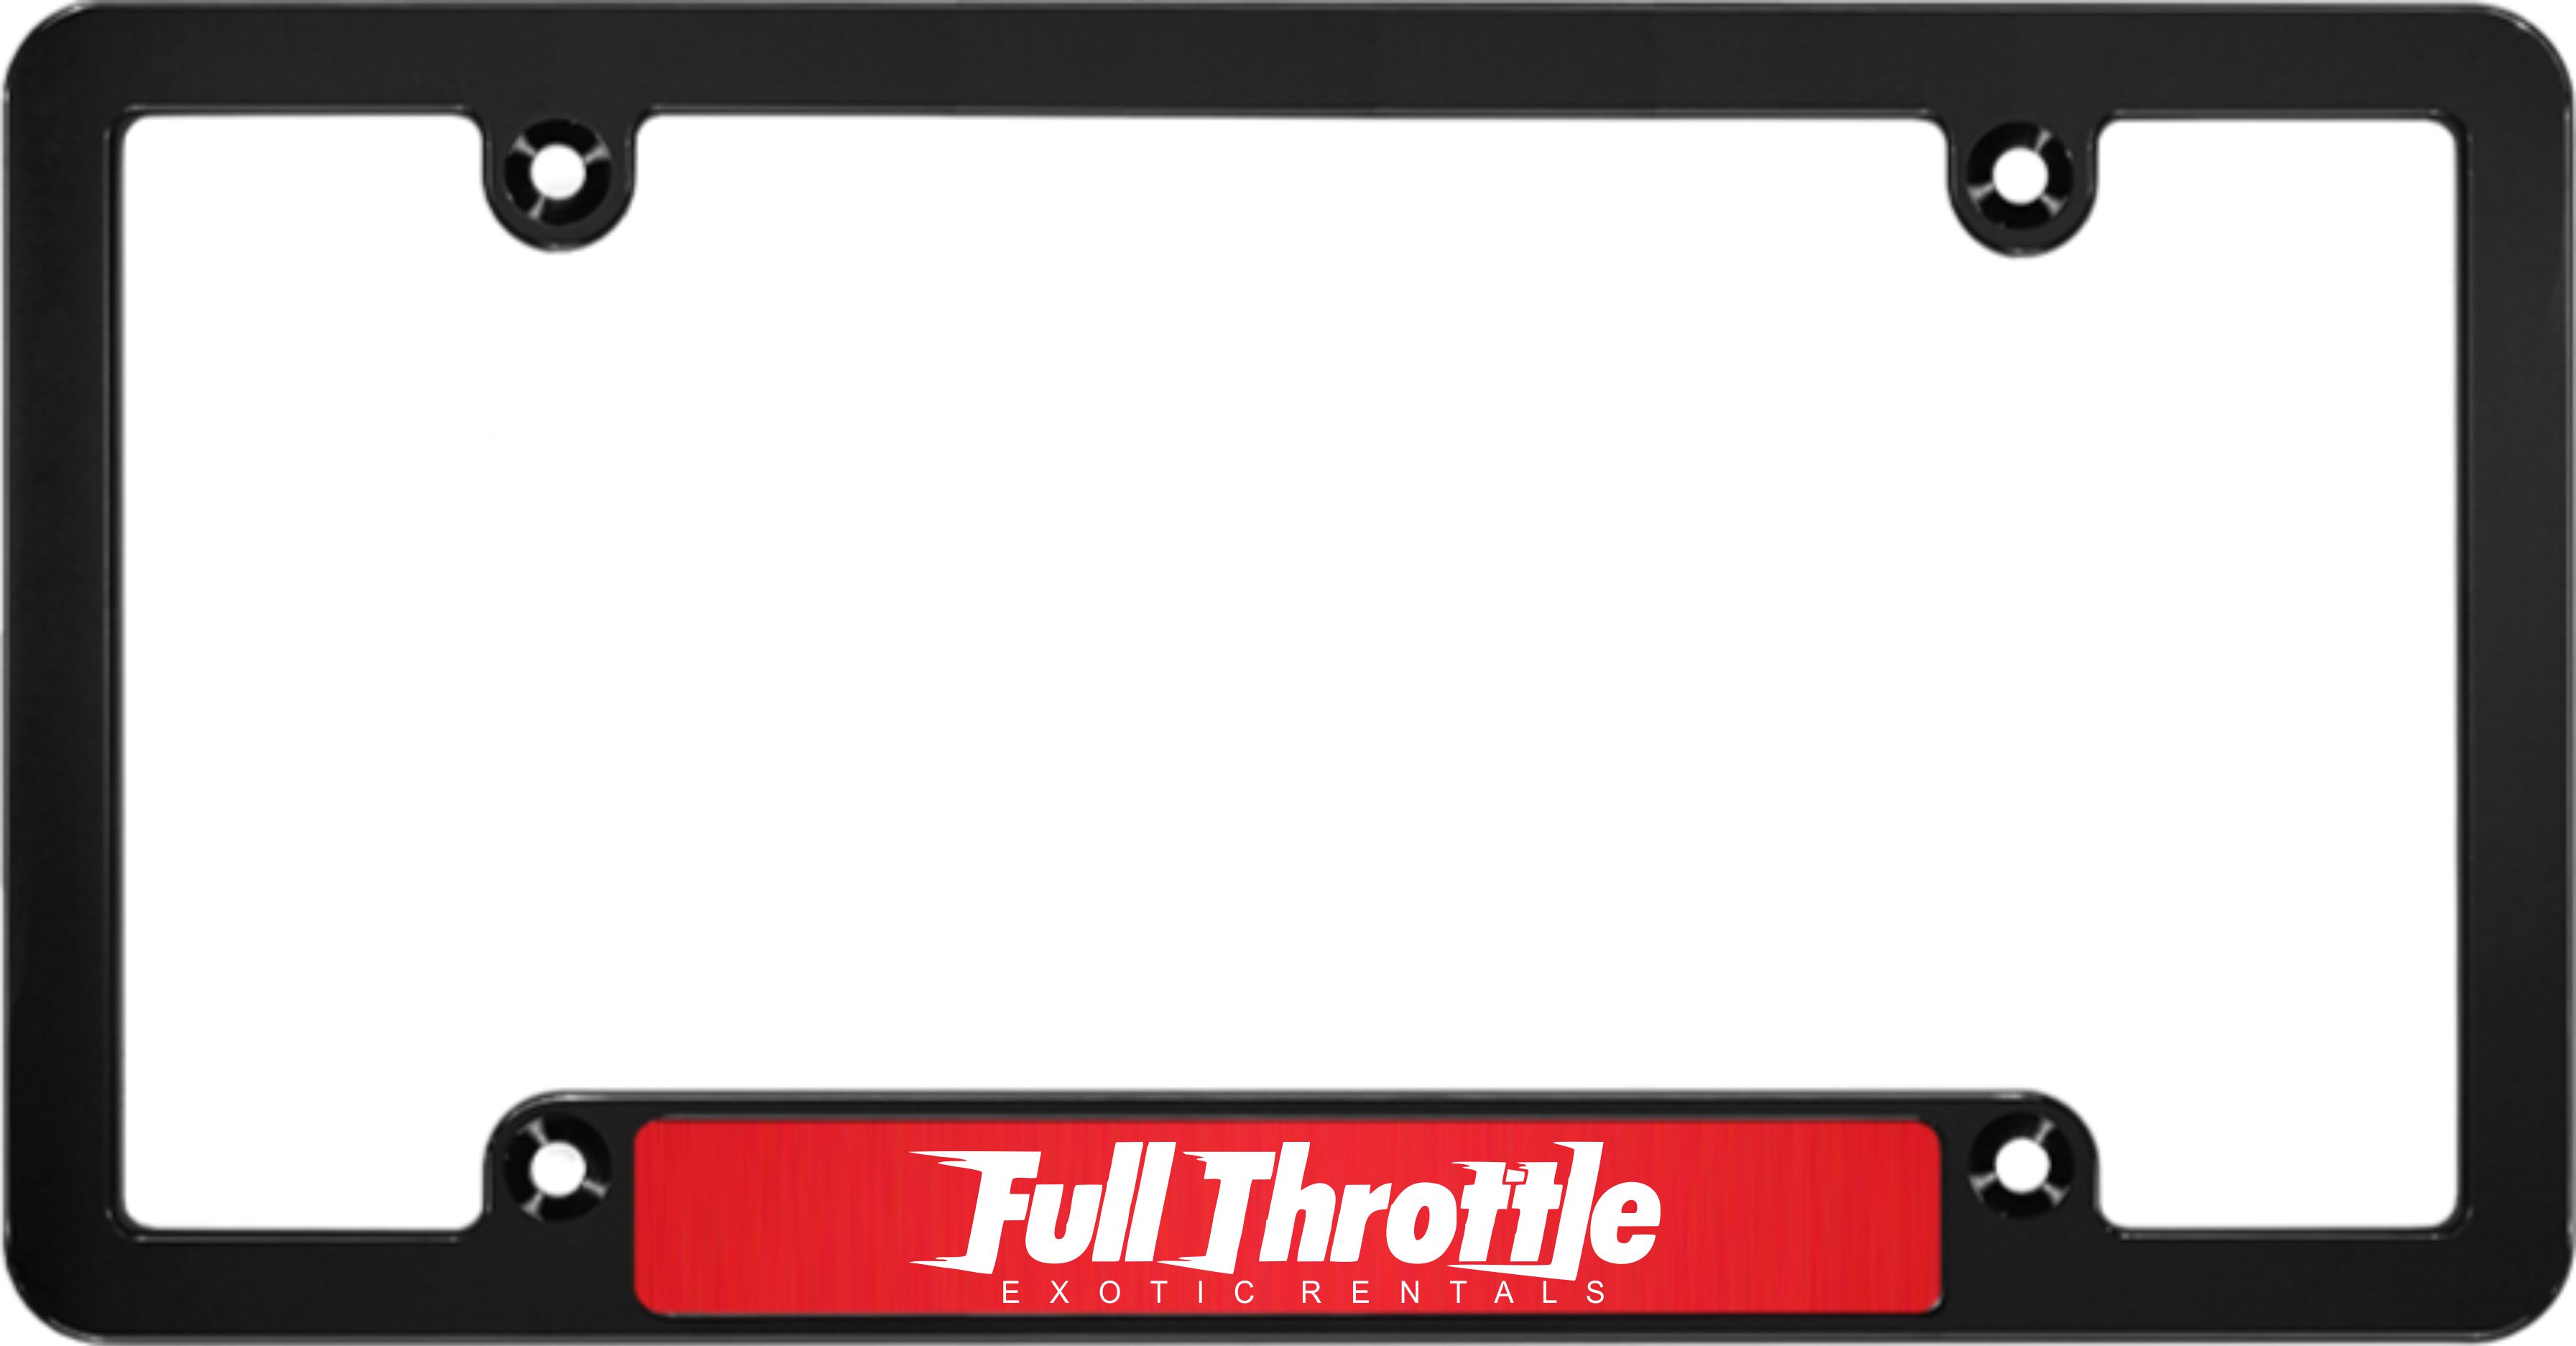 Full Throttle CNC machined license plate frame